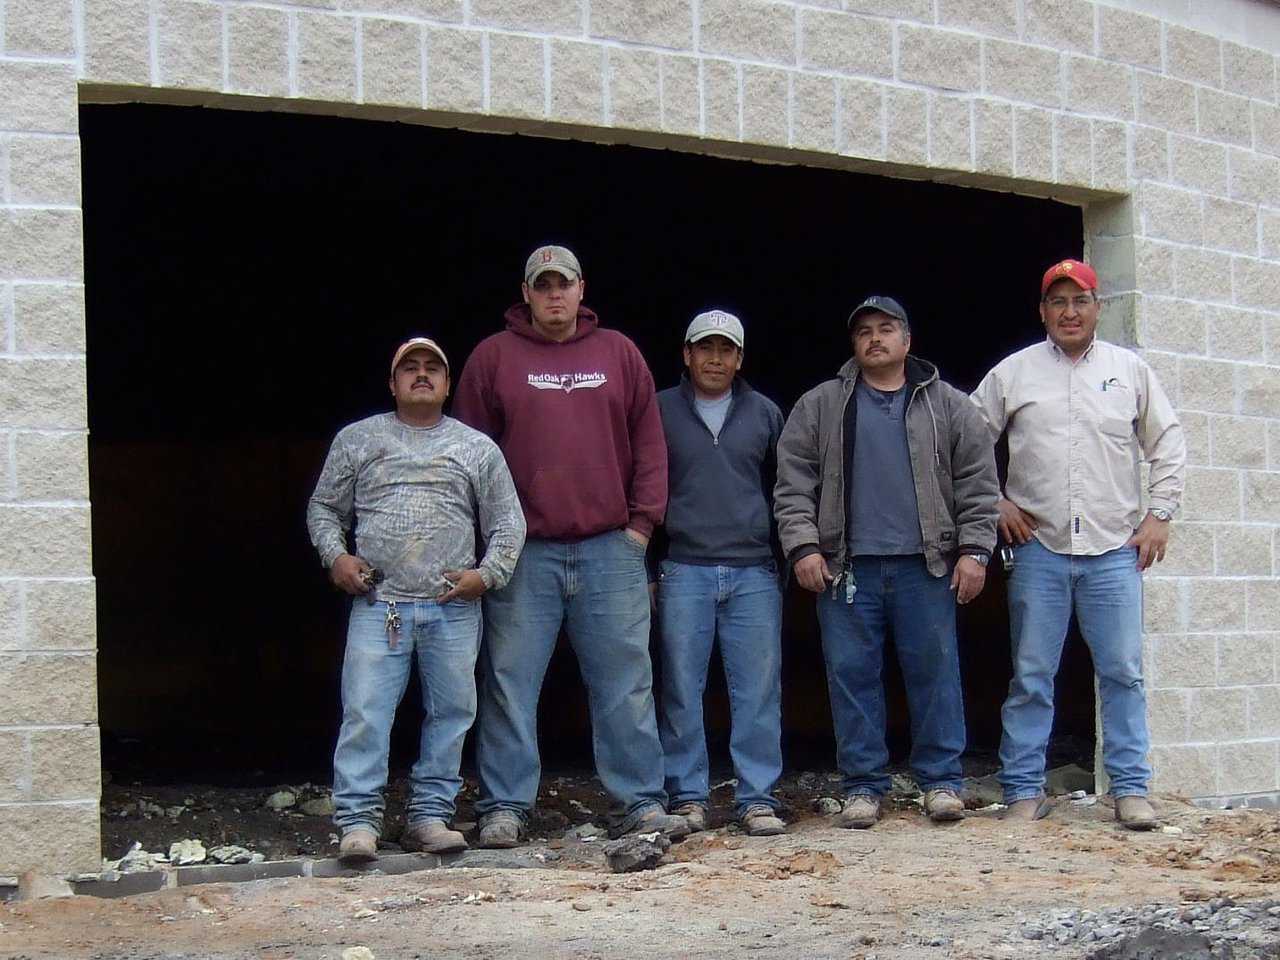 Experience — The Monolithic Construction Crew has combined experience of over 45 years.  (L-R) Hector Sanchez, Jeff Evans, Andres Garcia, Javier Chaire, and Javier Figueroa